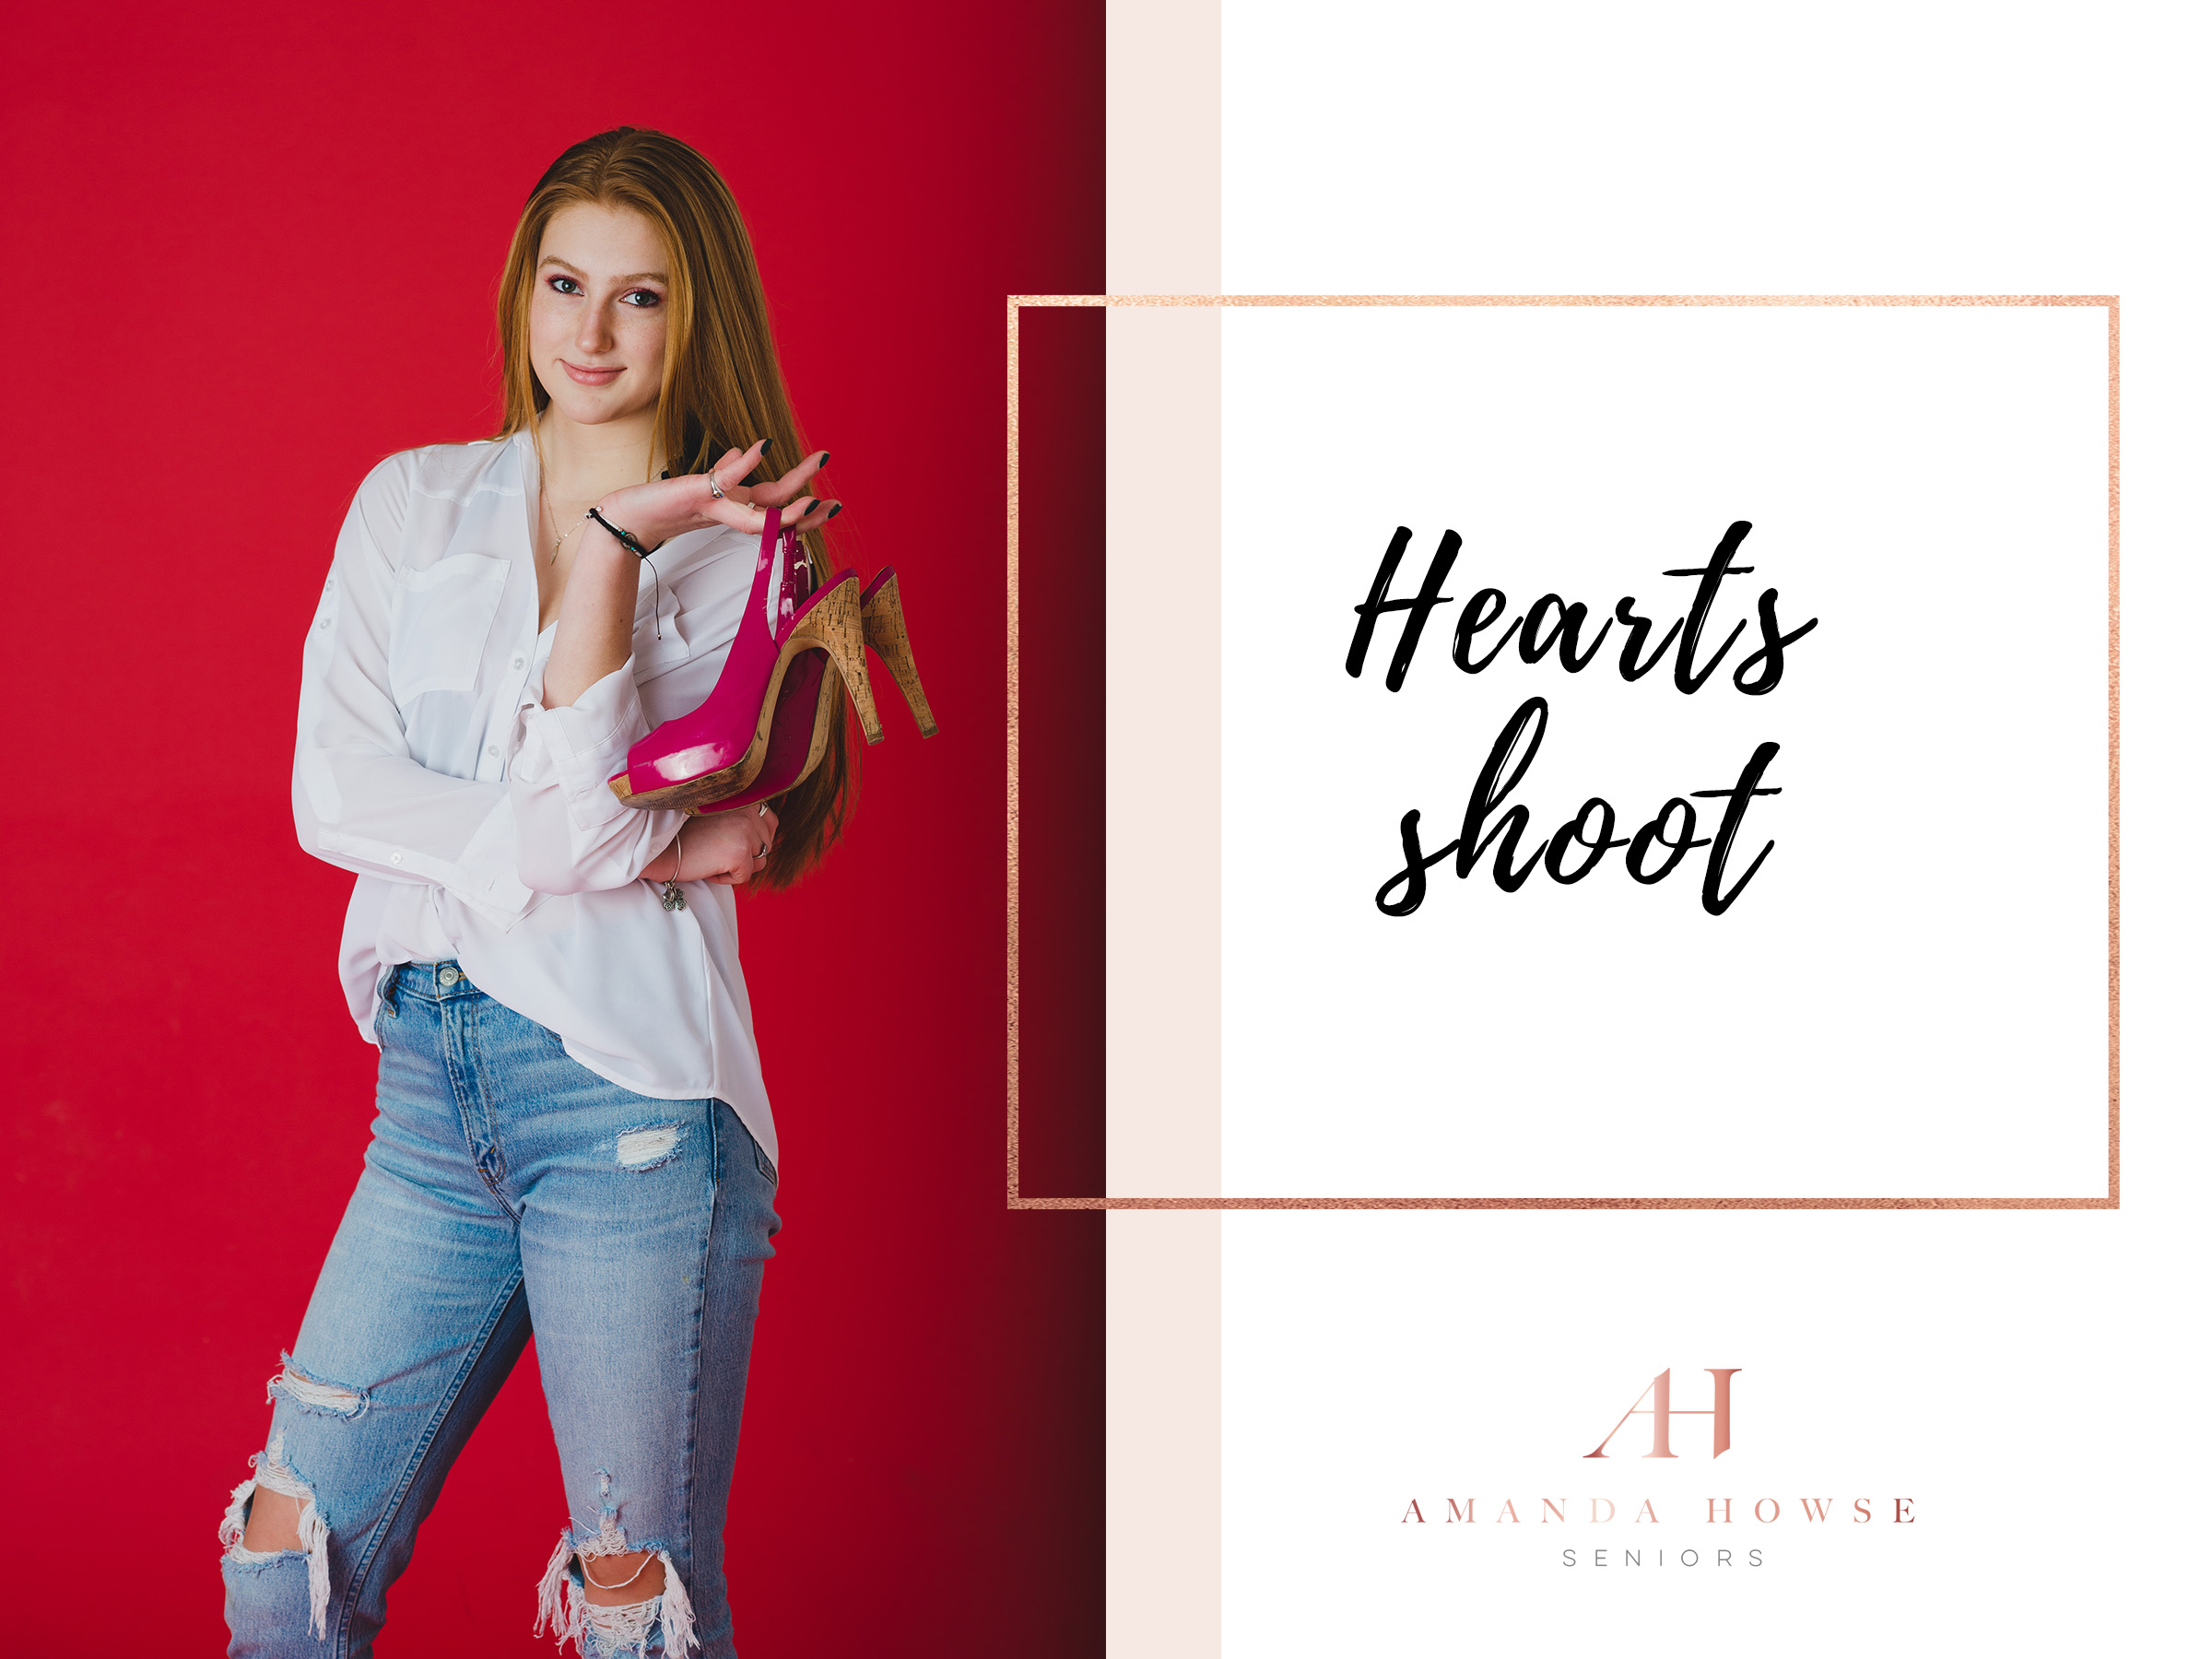 Hearts-Themed Photoshoot at Studio 253 in Downtown Tacoma | AHP Model Team Themed Portrait Sessions, Outfit Ideas for Valentine's Day, Pose Ideas for Indoor Senior Portraits, Flirty Outfit Inspiration | Photographed by the Best Tacoma Senior Photographer Amanda Howse